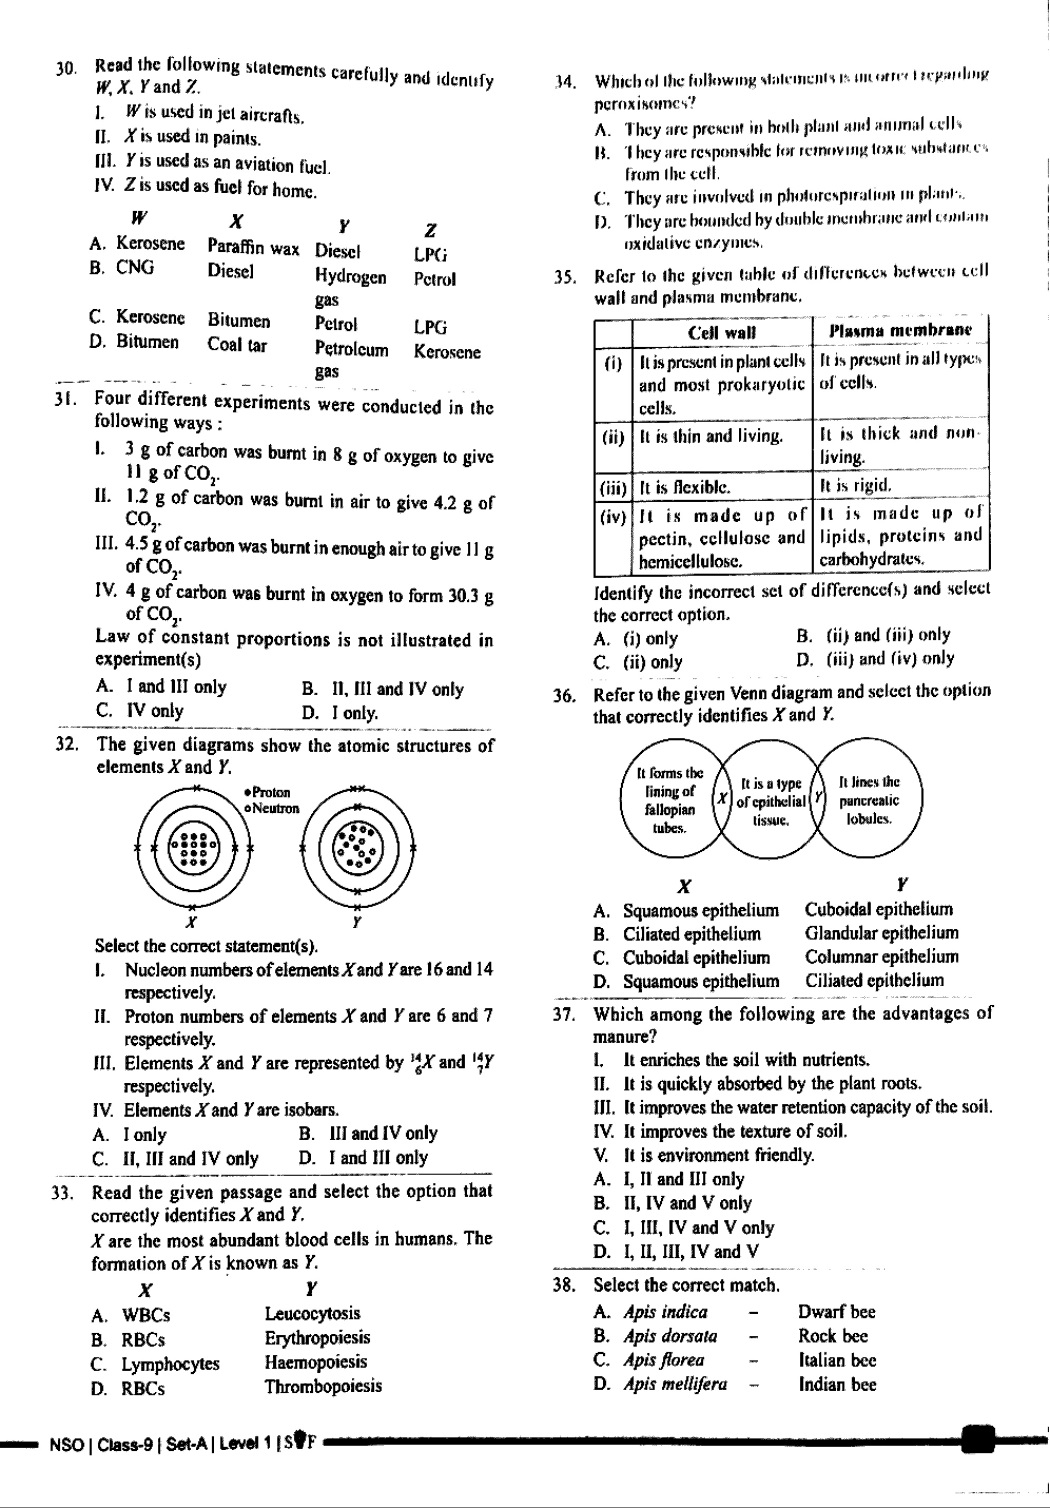 NSO question papers